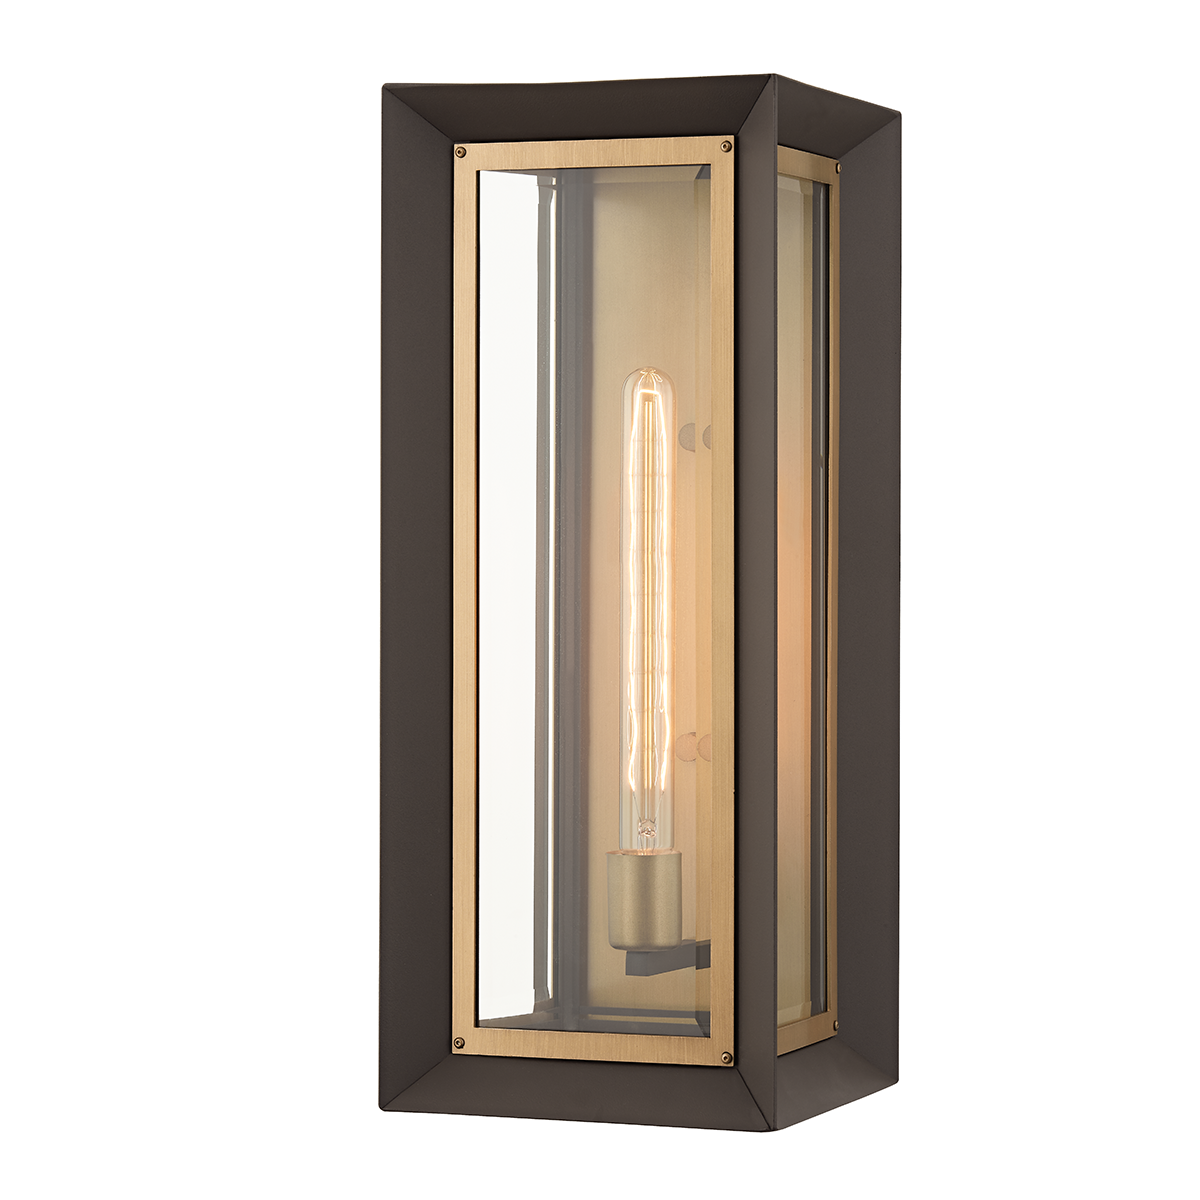 Troy Lighting 1 LIGHT LARGE EXTERIOR WALL SCONCE B4053